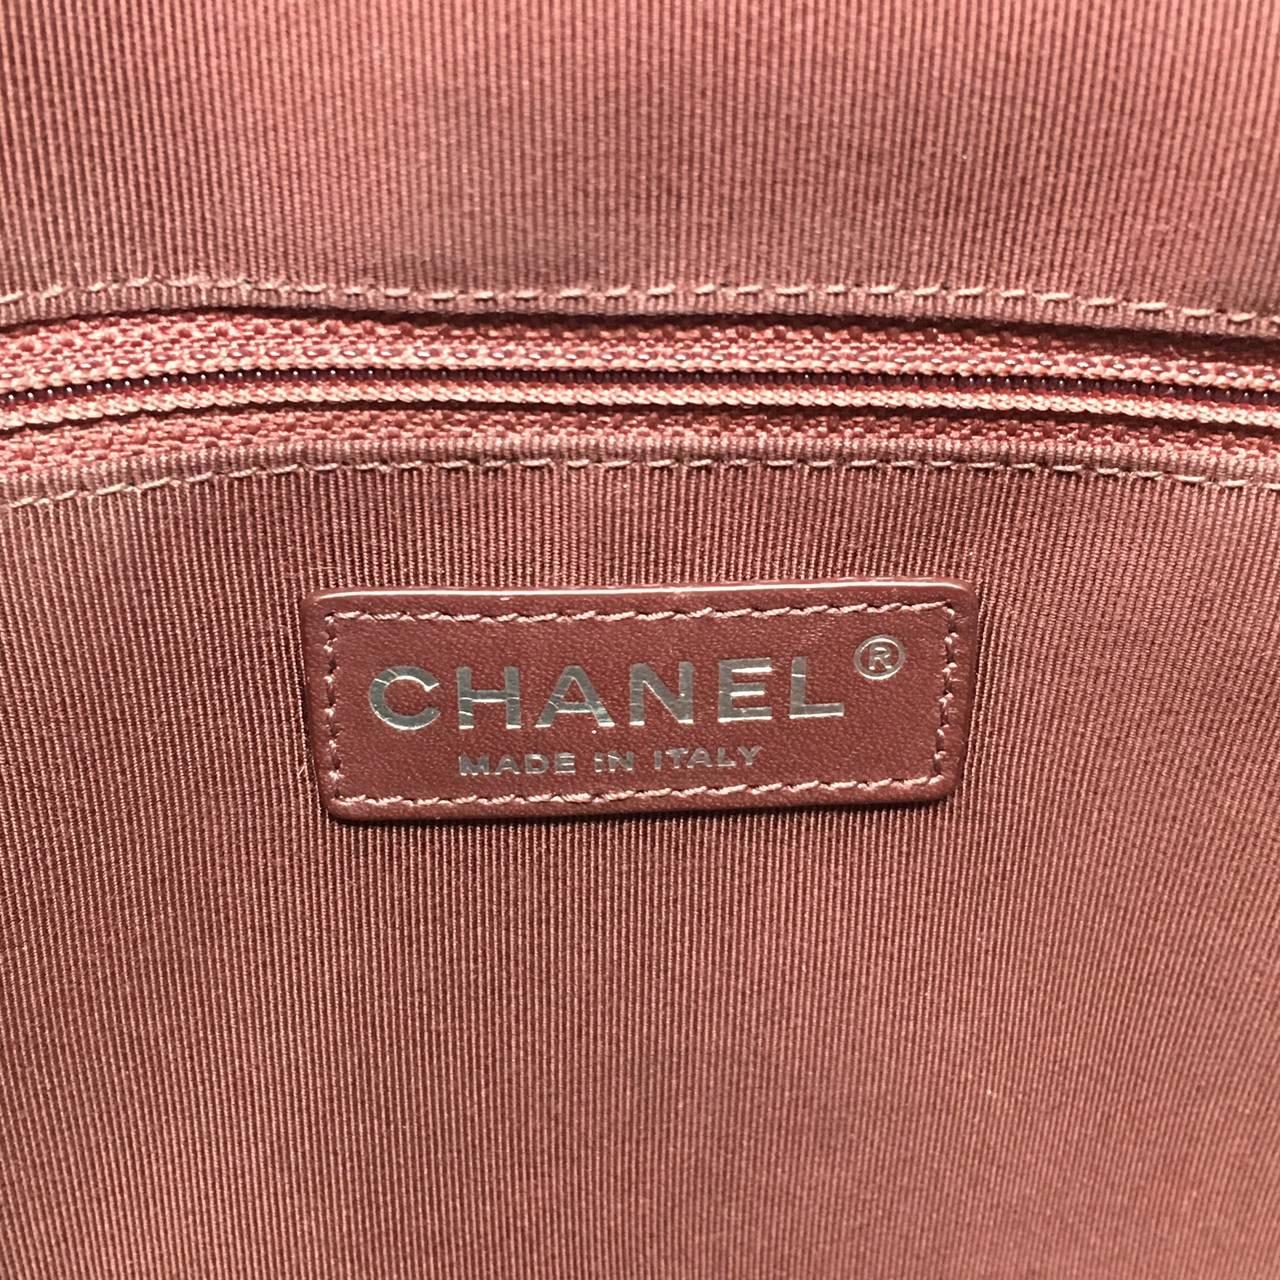 Chanel Paris Shopping Tote Bag Aged Calfskin Black Leather, the bag your shoulder comes in excellent condition of production 2016.
Inside fabric, two pocket with zipper. Very good condition, Comfortable and adaptable bag for all days. Dust bag